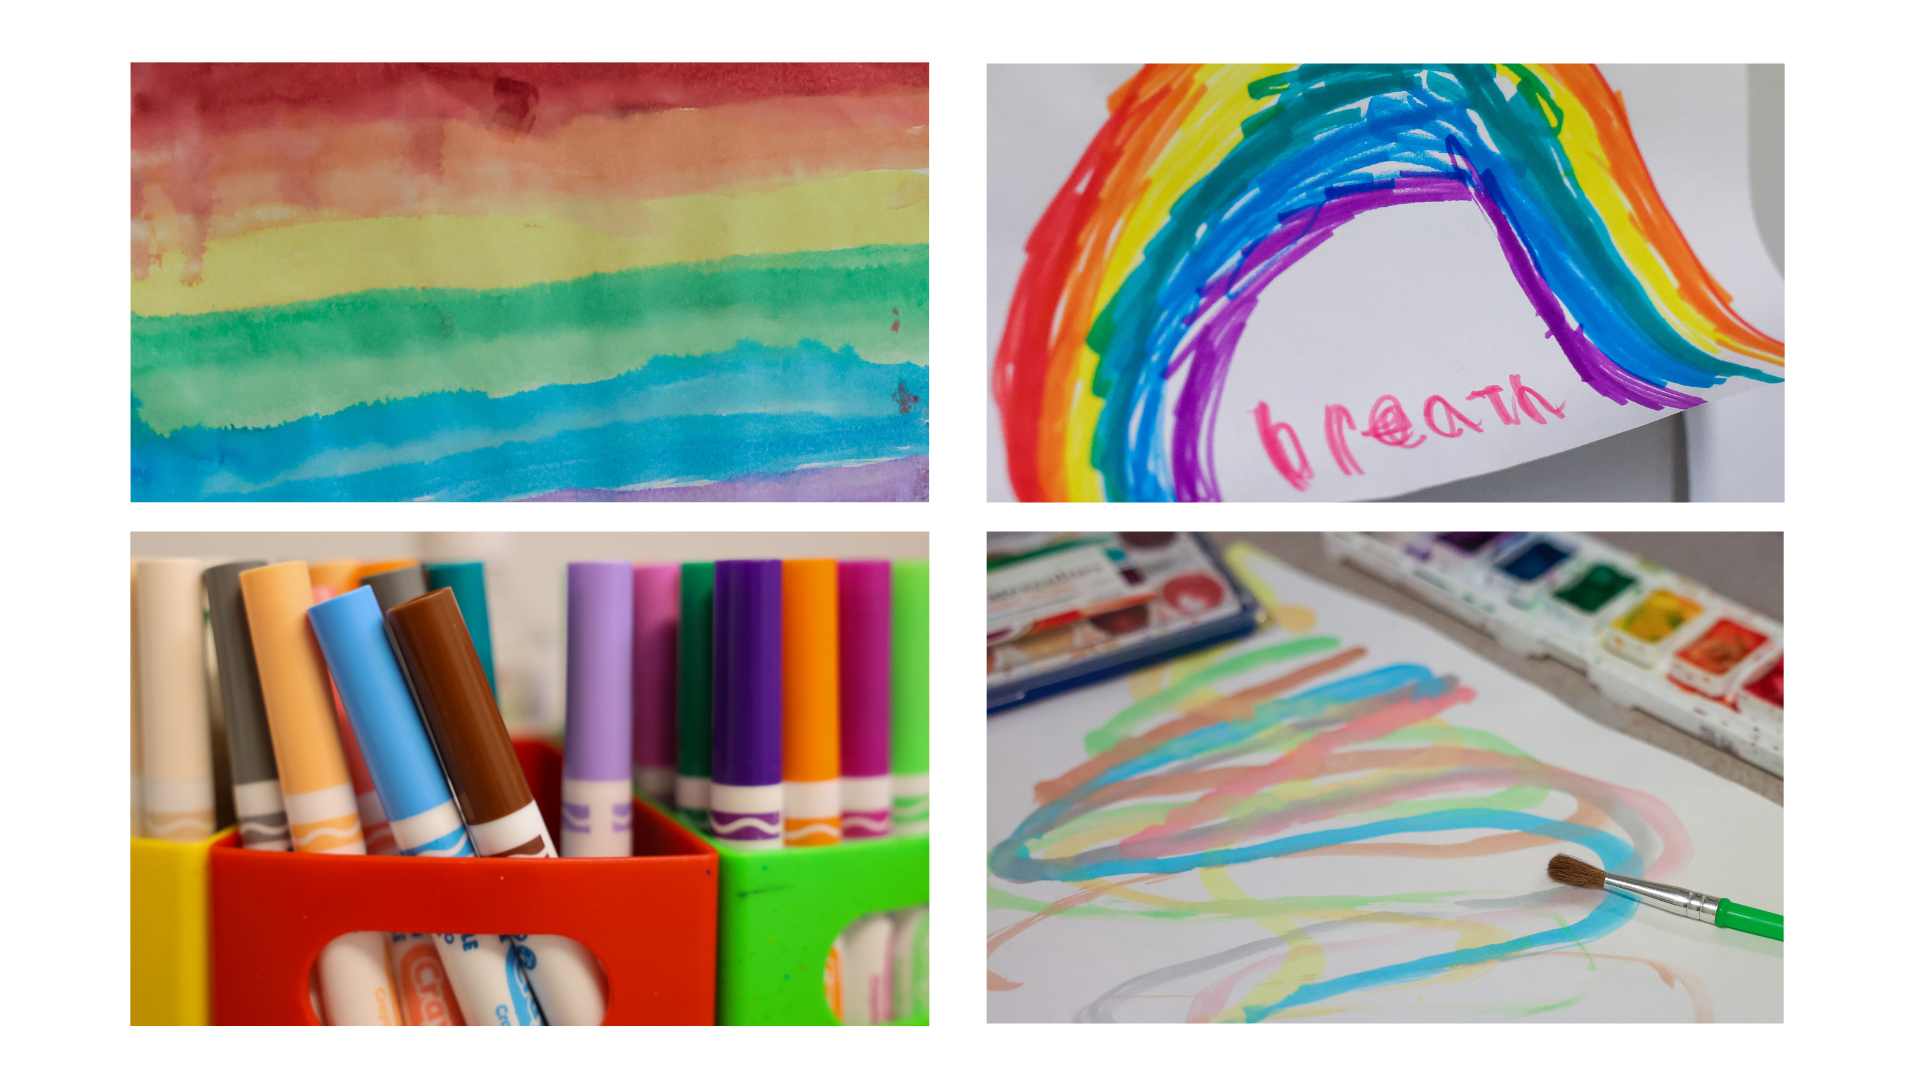 4 photos of drawings and materials that can used at Clarity Counseling